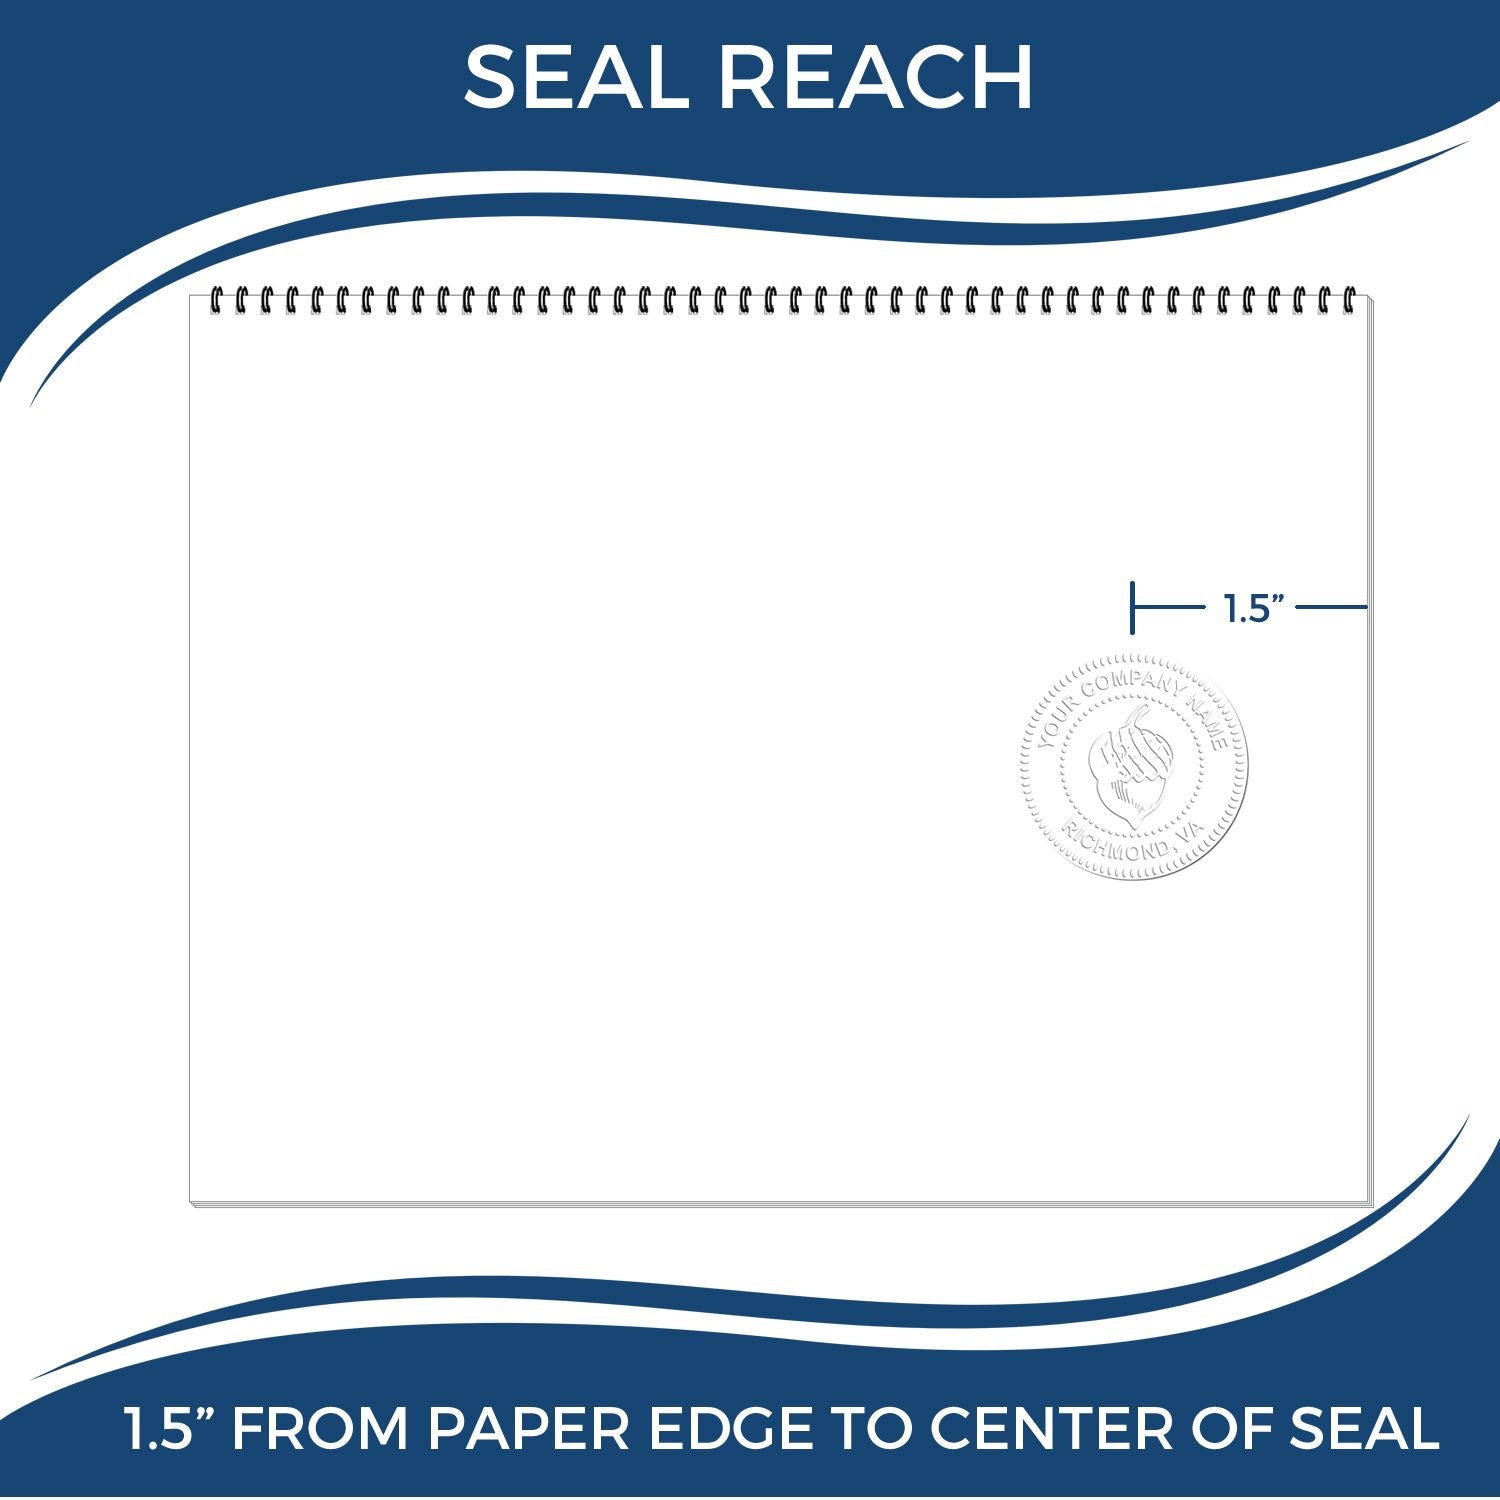 An infographic showing the seal reach which is represented by a ruler and a miniature seal image of the Gift North Carolina Architect Seal